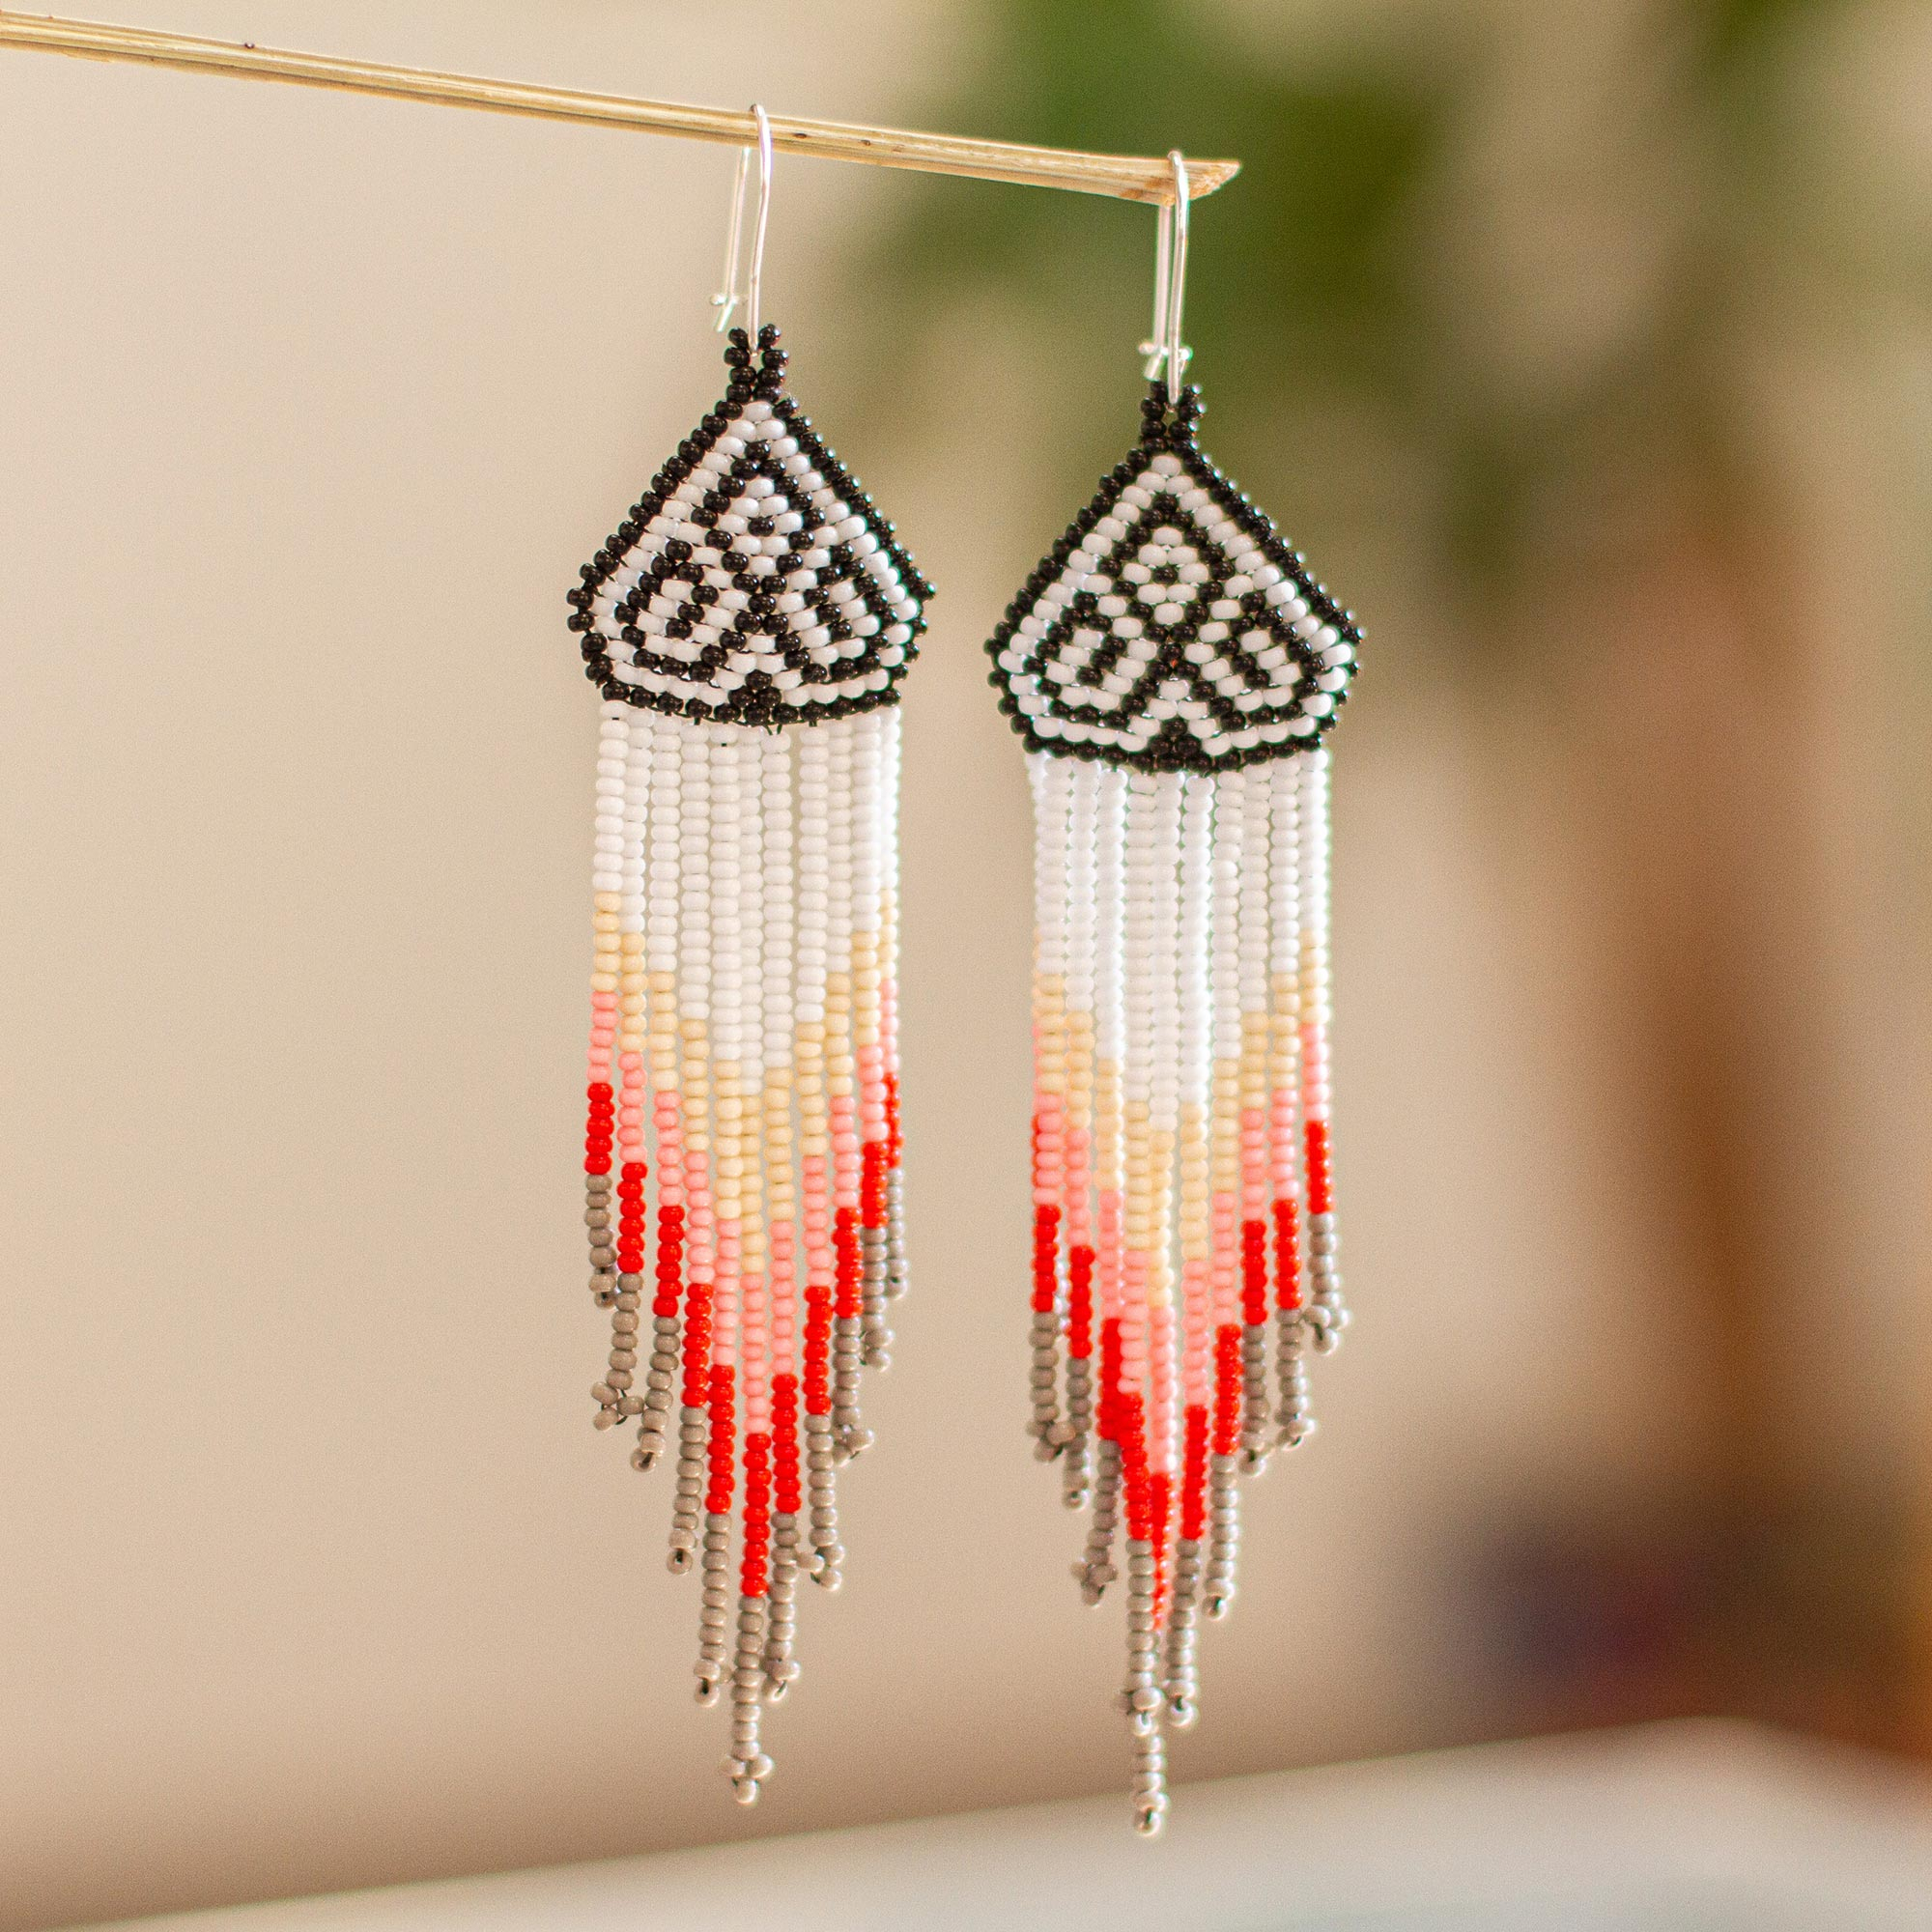 Leather and bead earrings